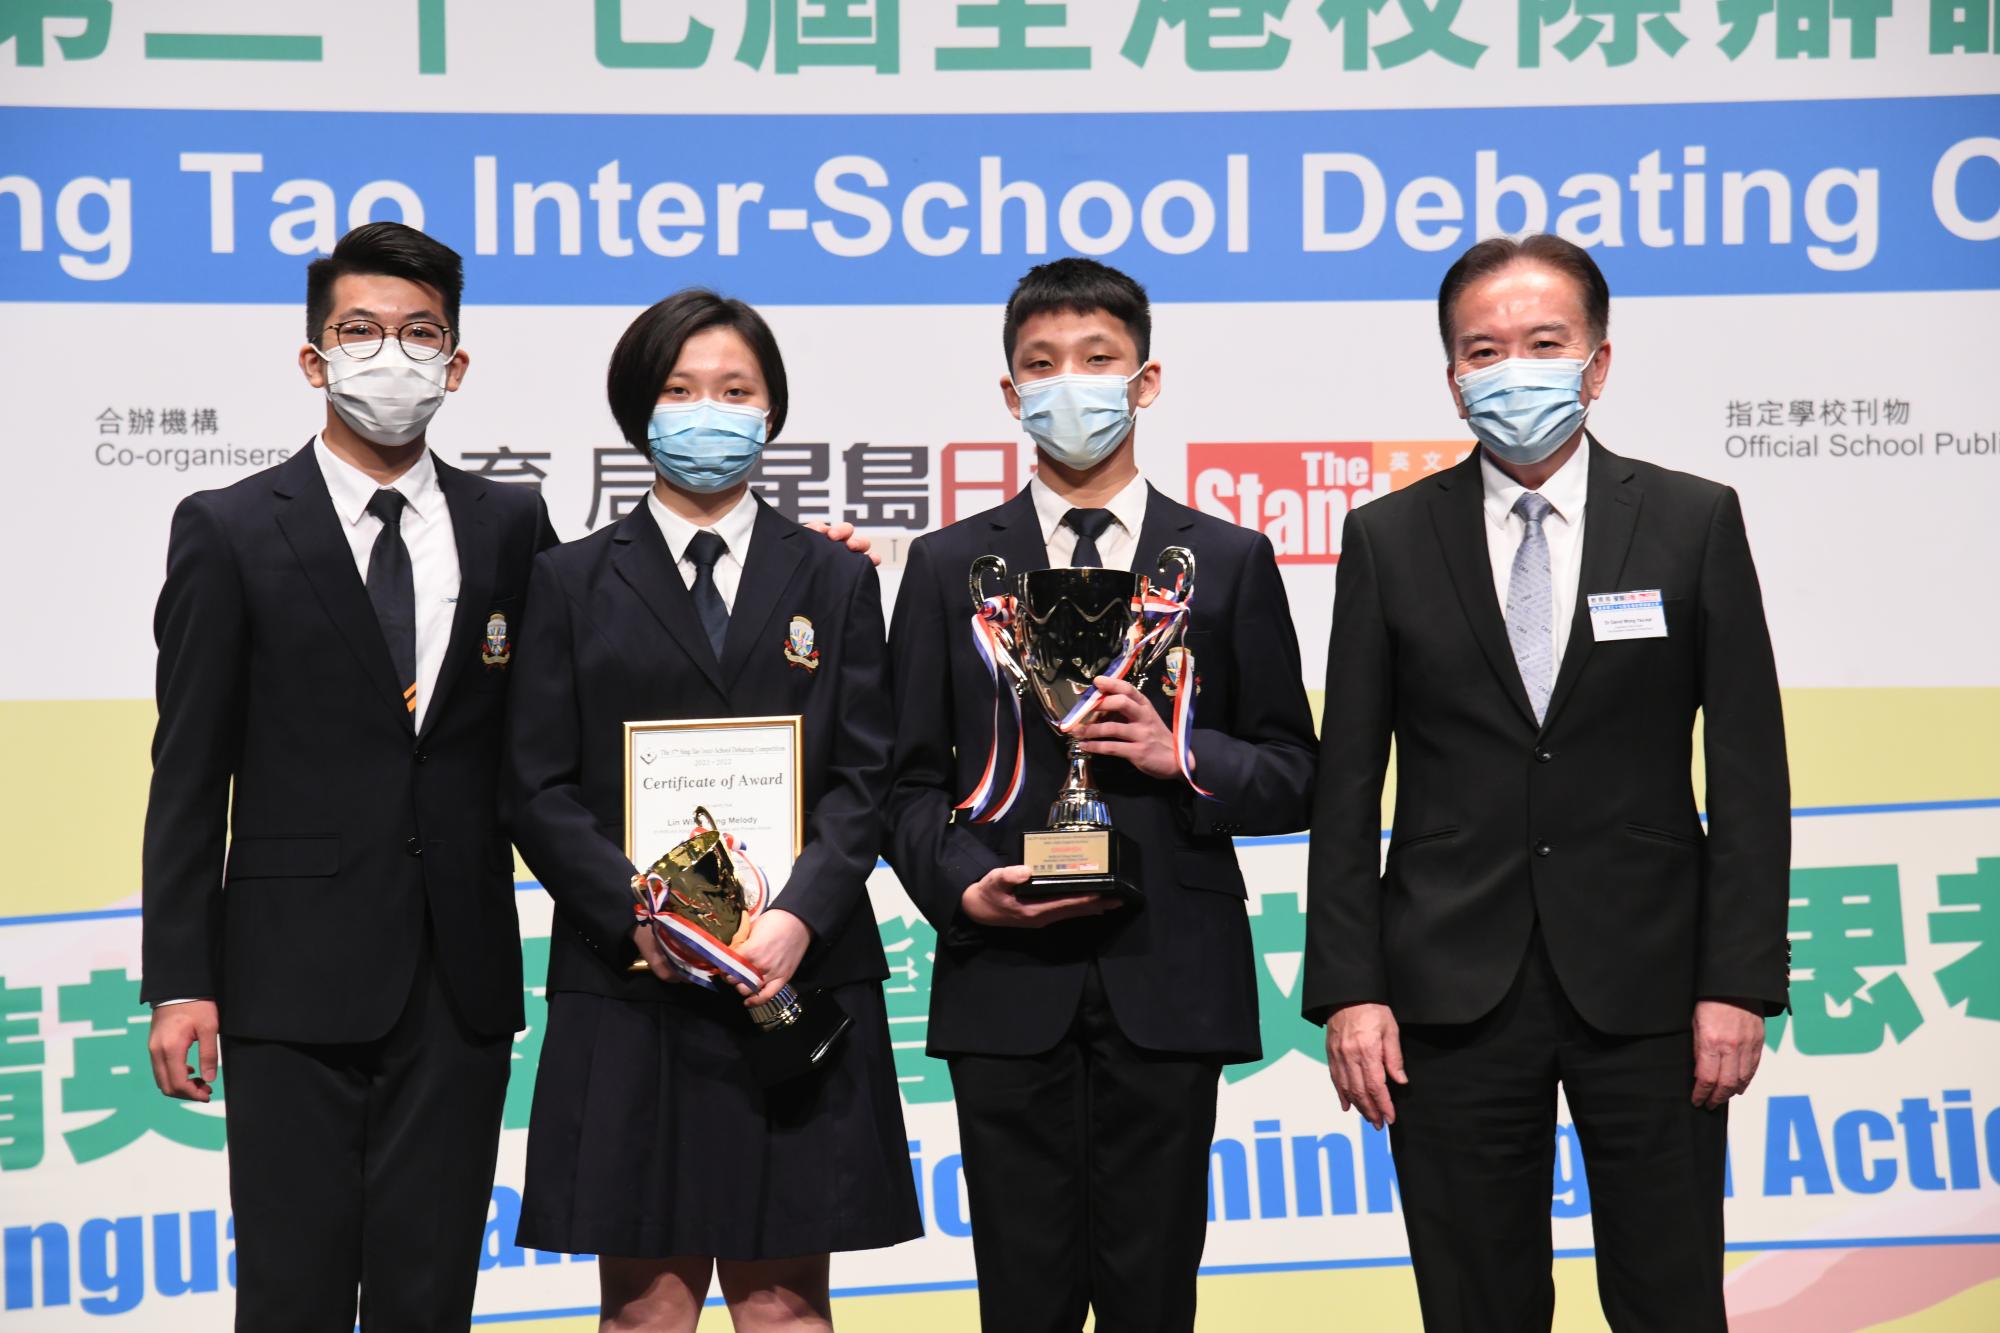 Our senior students were crowned Champion of The 37th Sing Tao Inter-School Debating Competition (English Section)